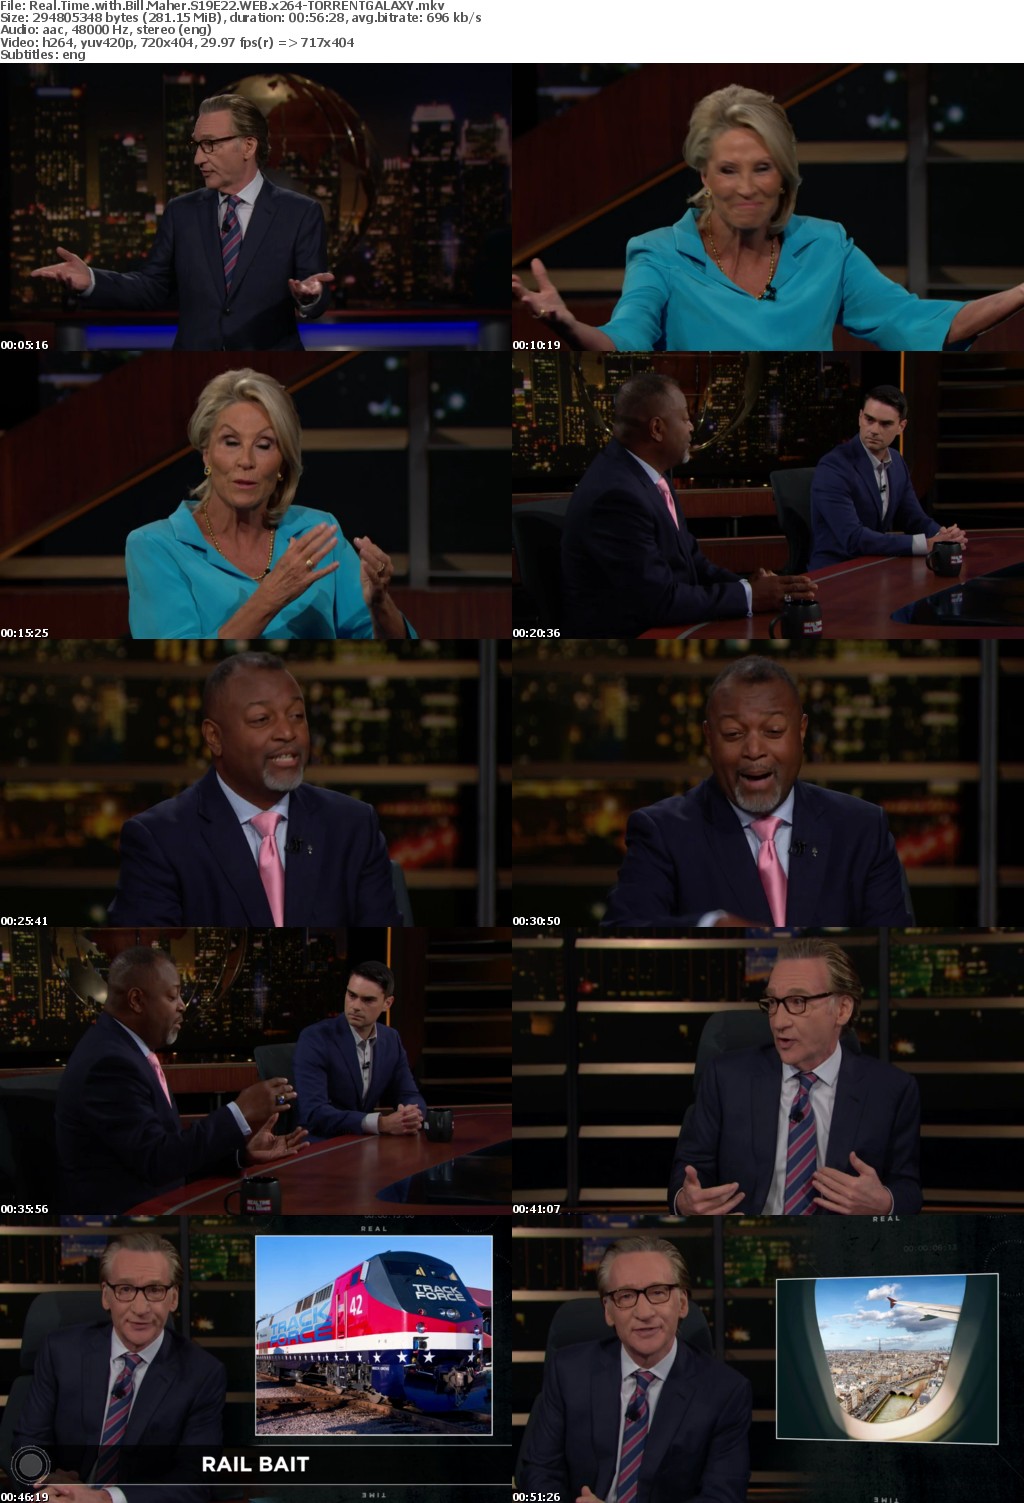 Real Time with Bill Maher S19E22 WEB x264-GALAXY